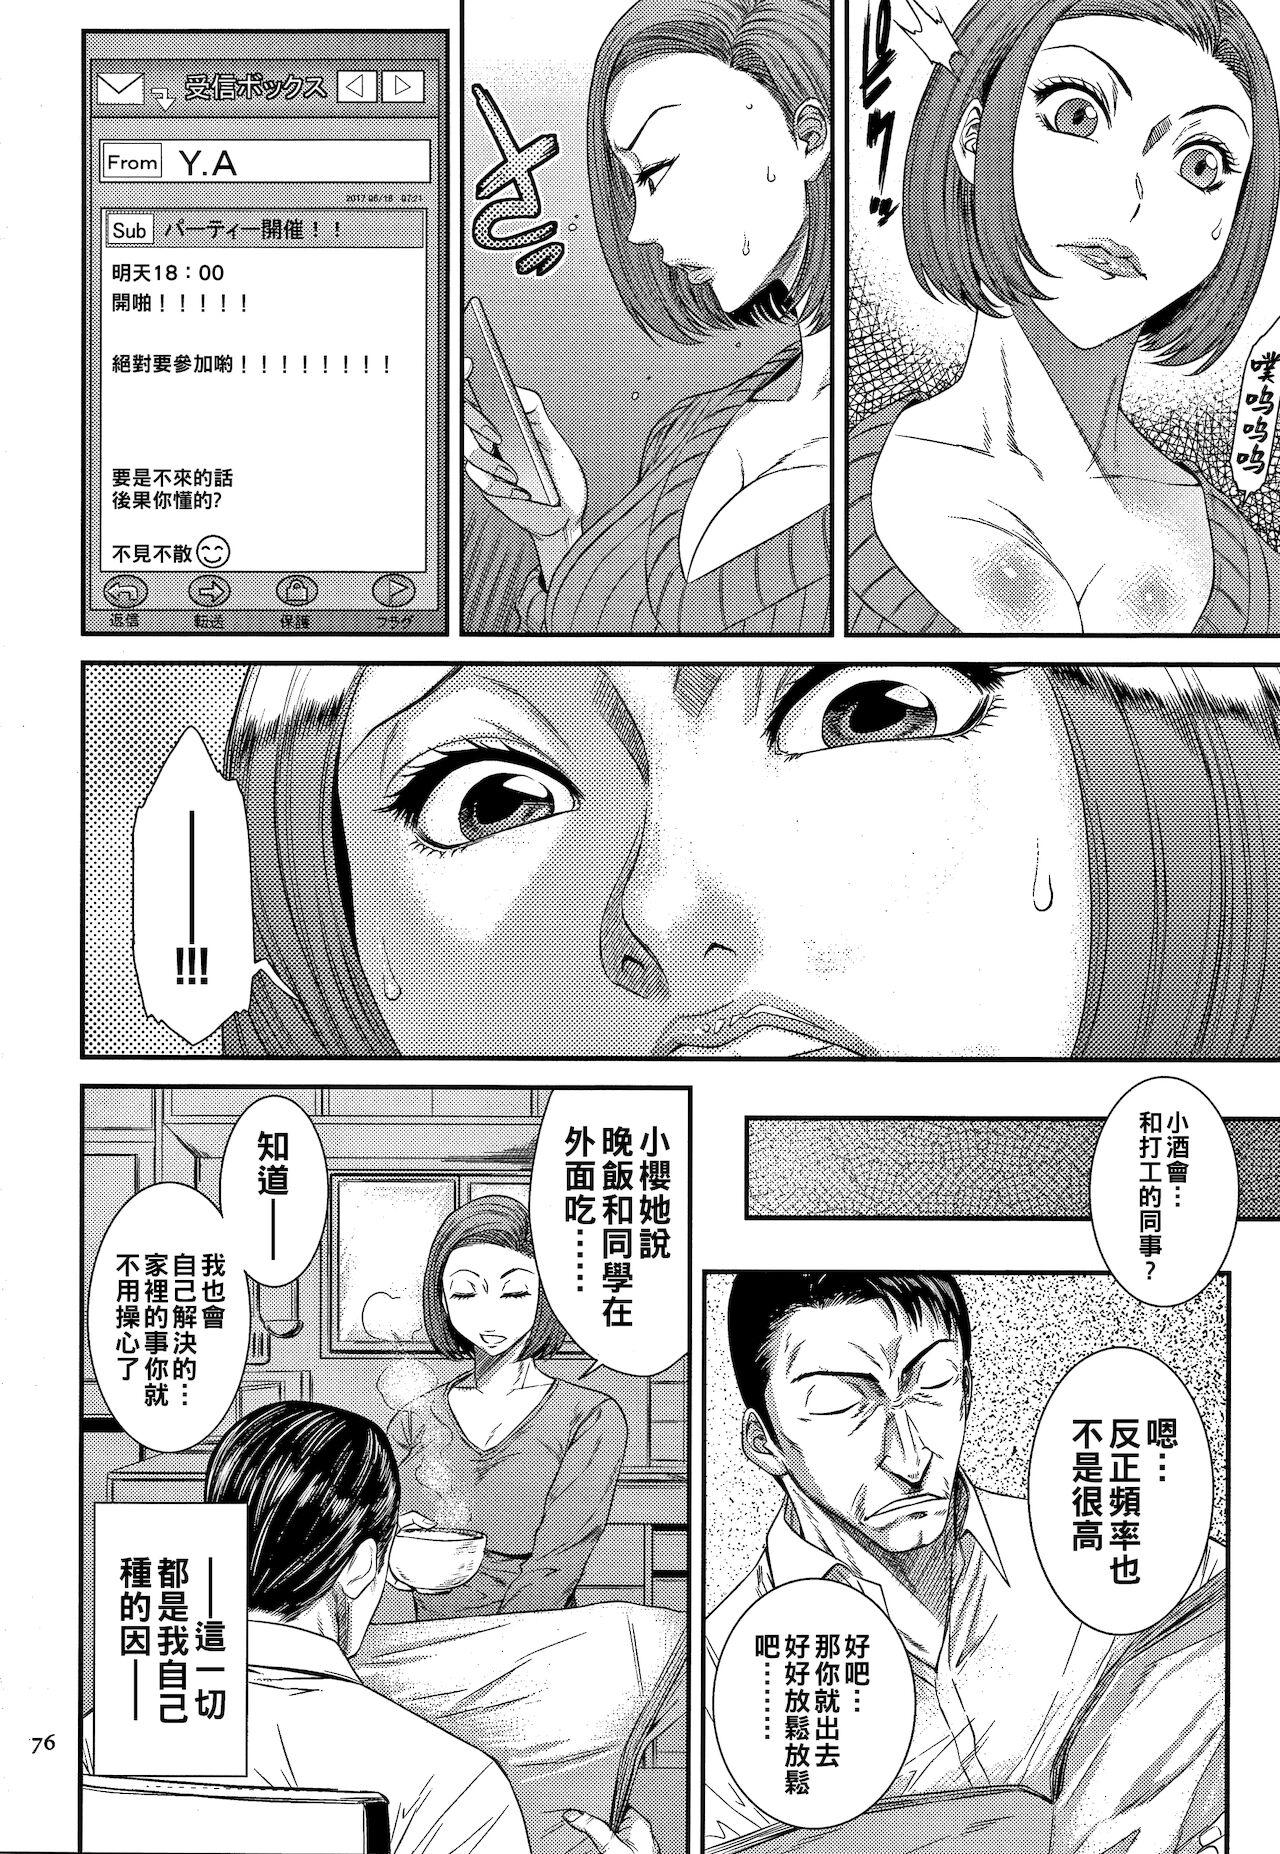 Rubbing 愛欲の罠（Chinese） Stepson - Page 4